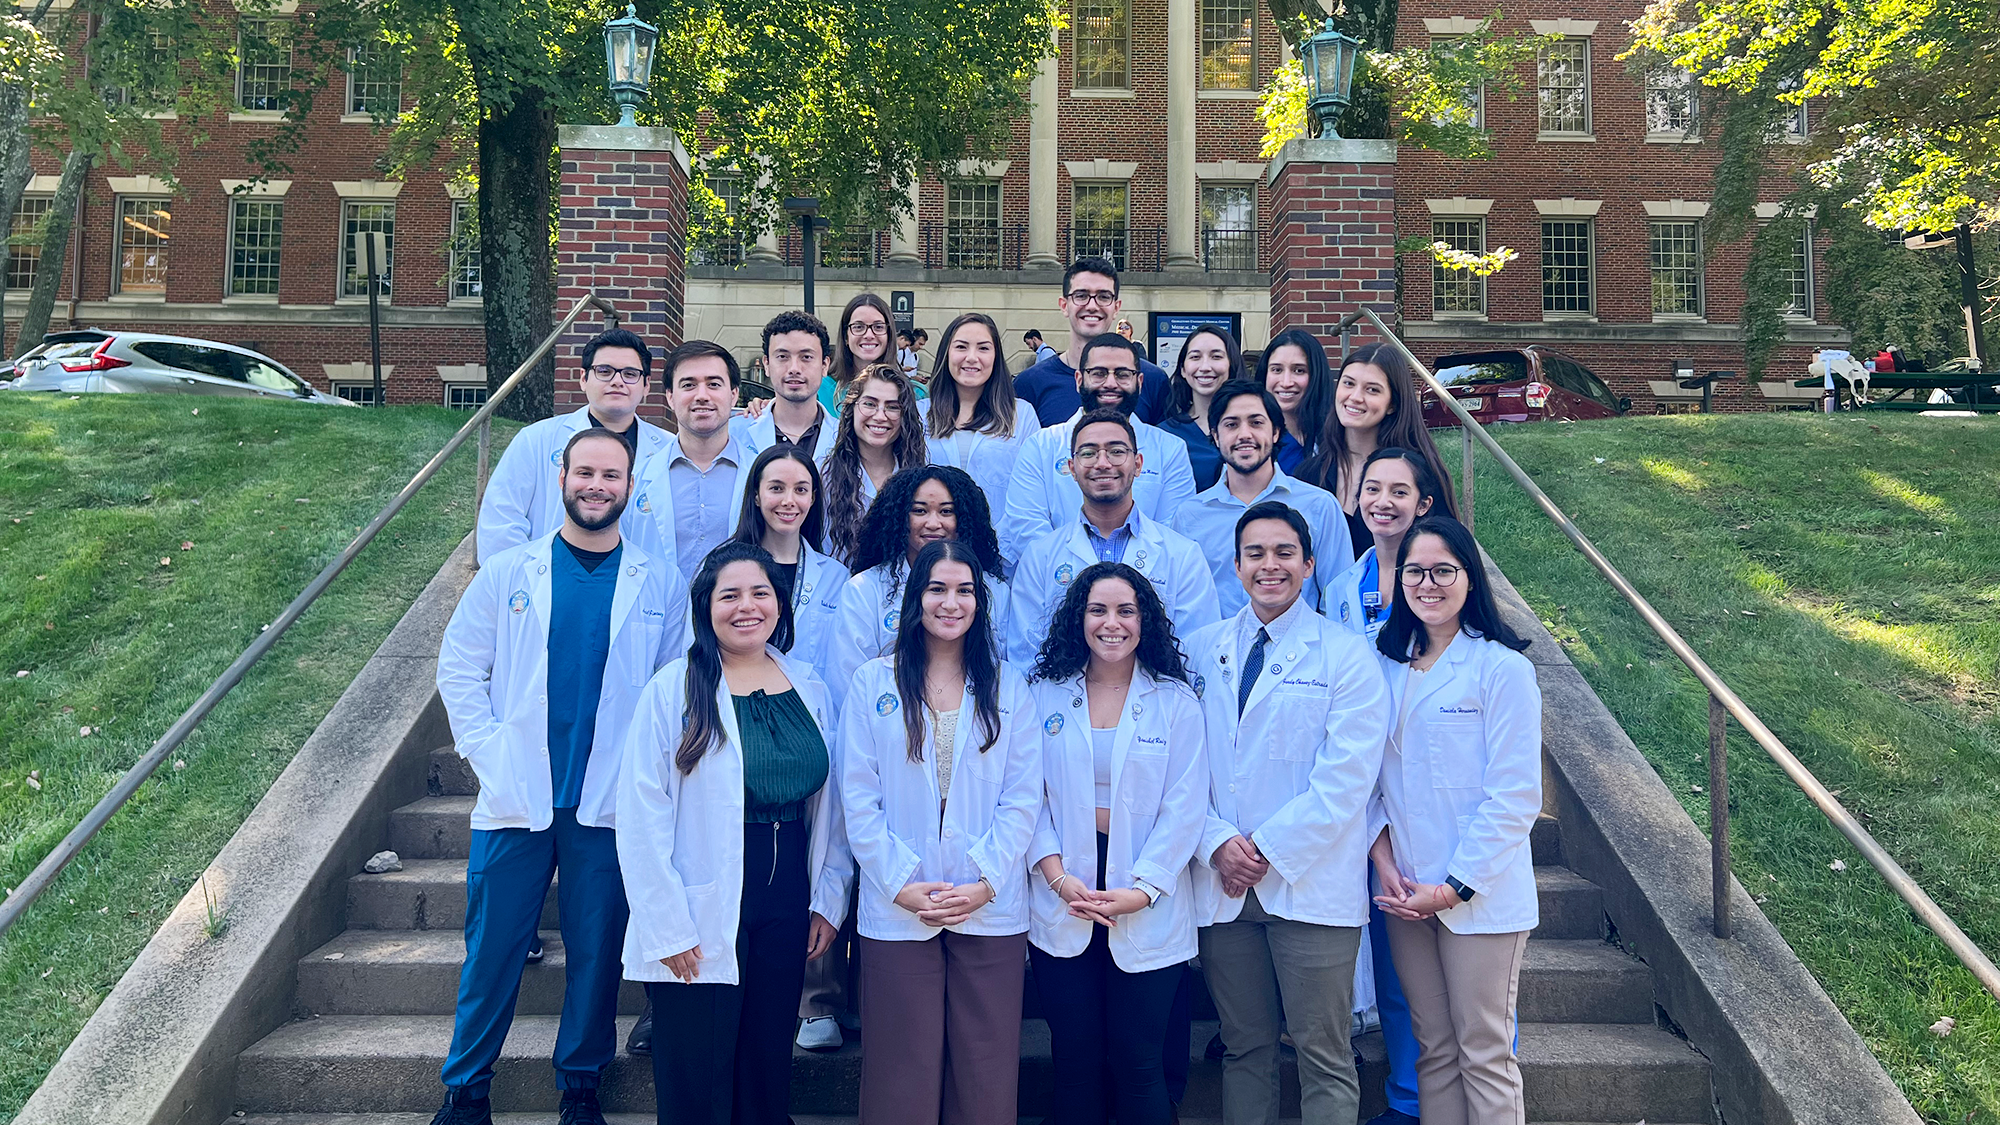 A group of medical students in white coats stand together on the steps in front of the Med-Dent Building on Georgetown's campus